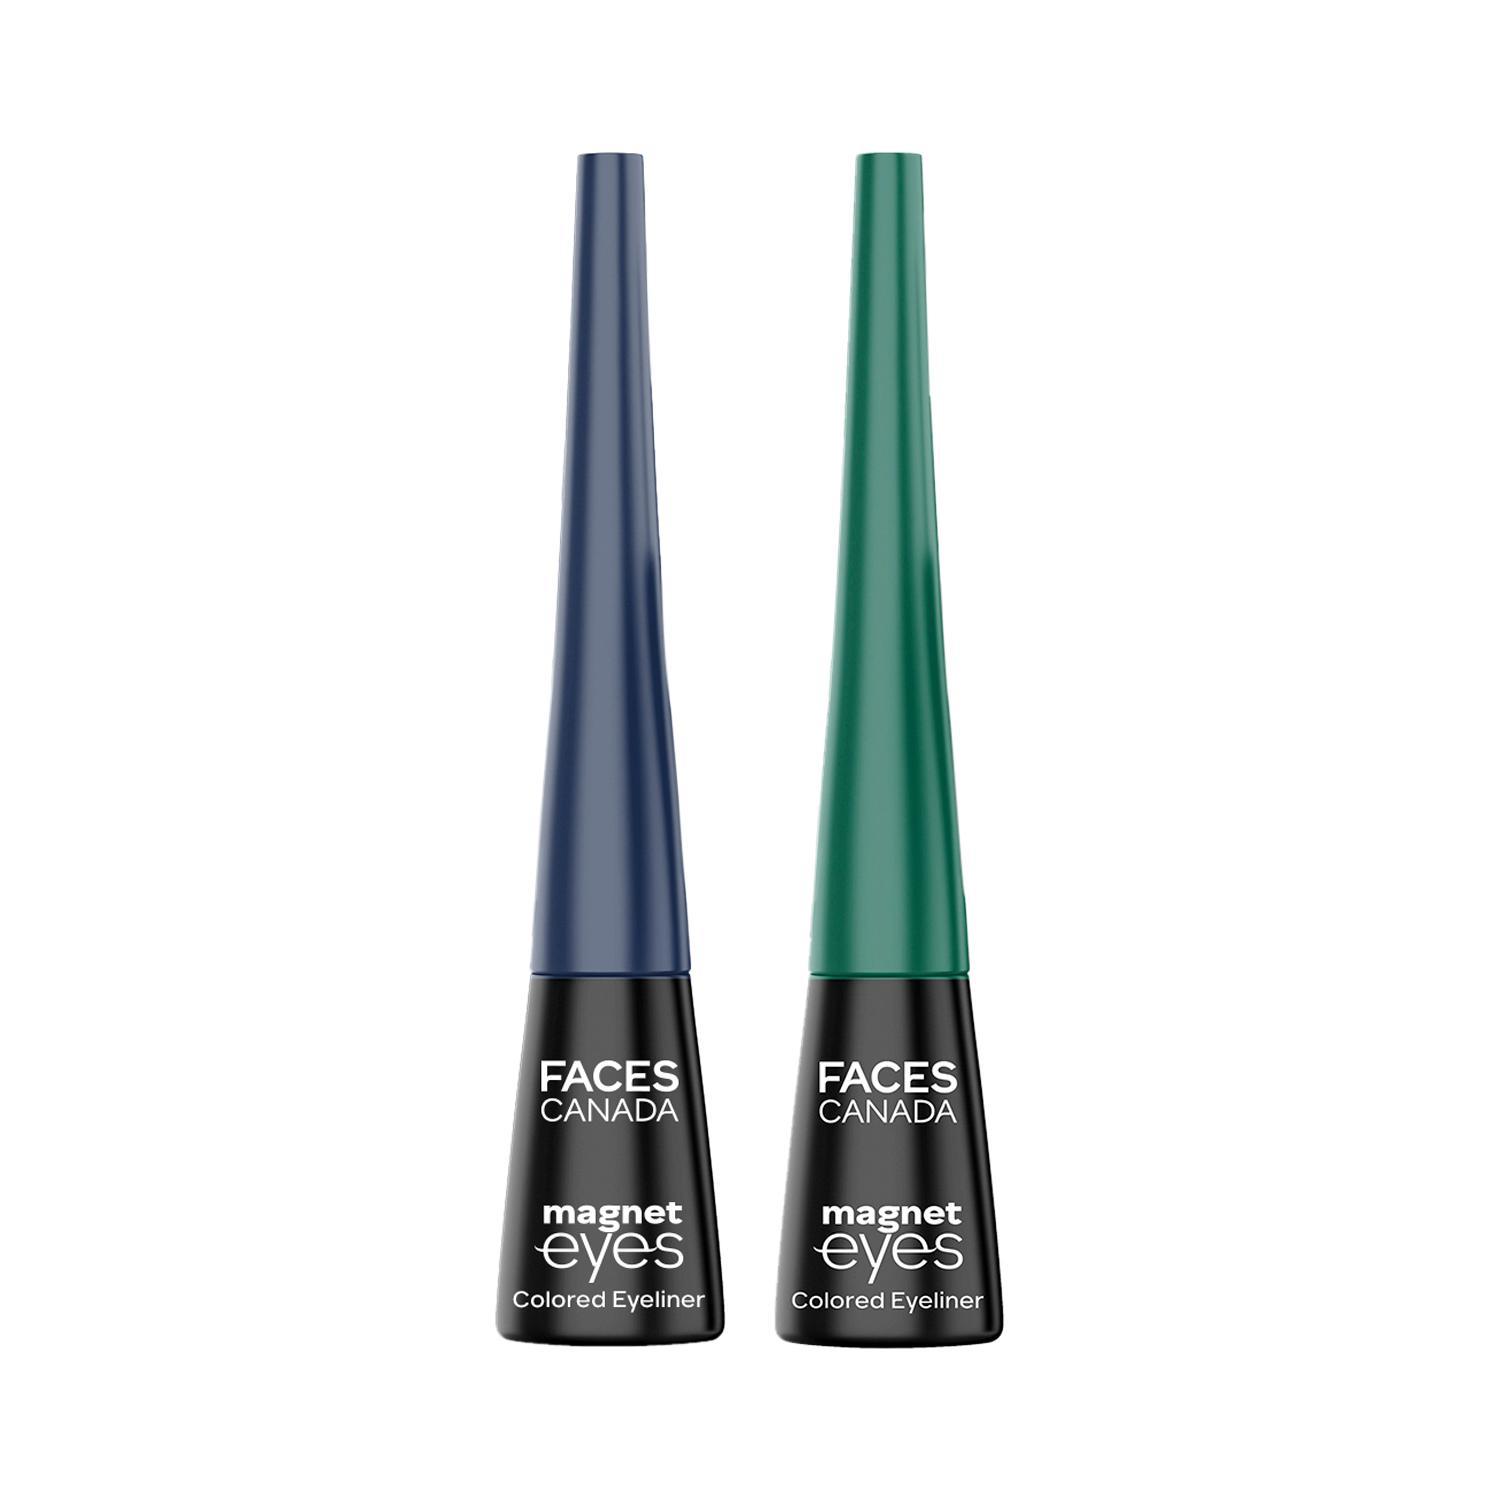 faces canada magneteyes color eyeliners pack of 2 elegant green and dazzling blue (4ml x 2) combo